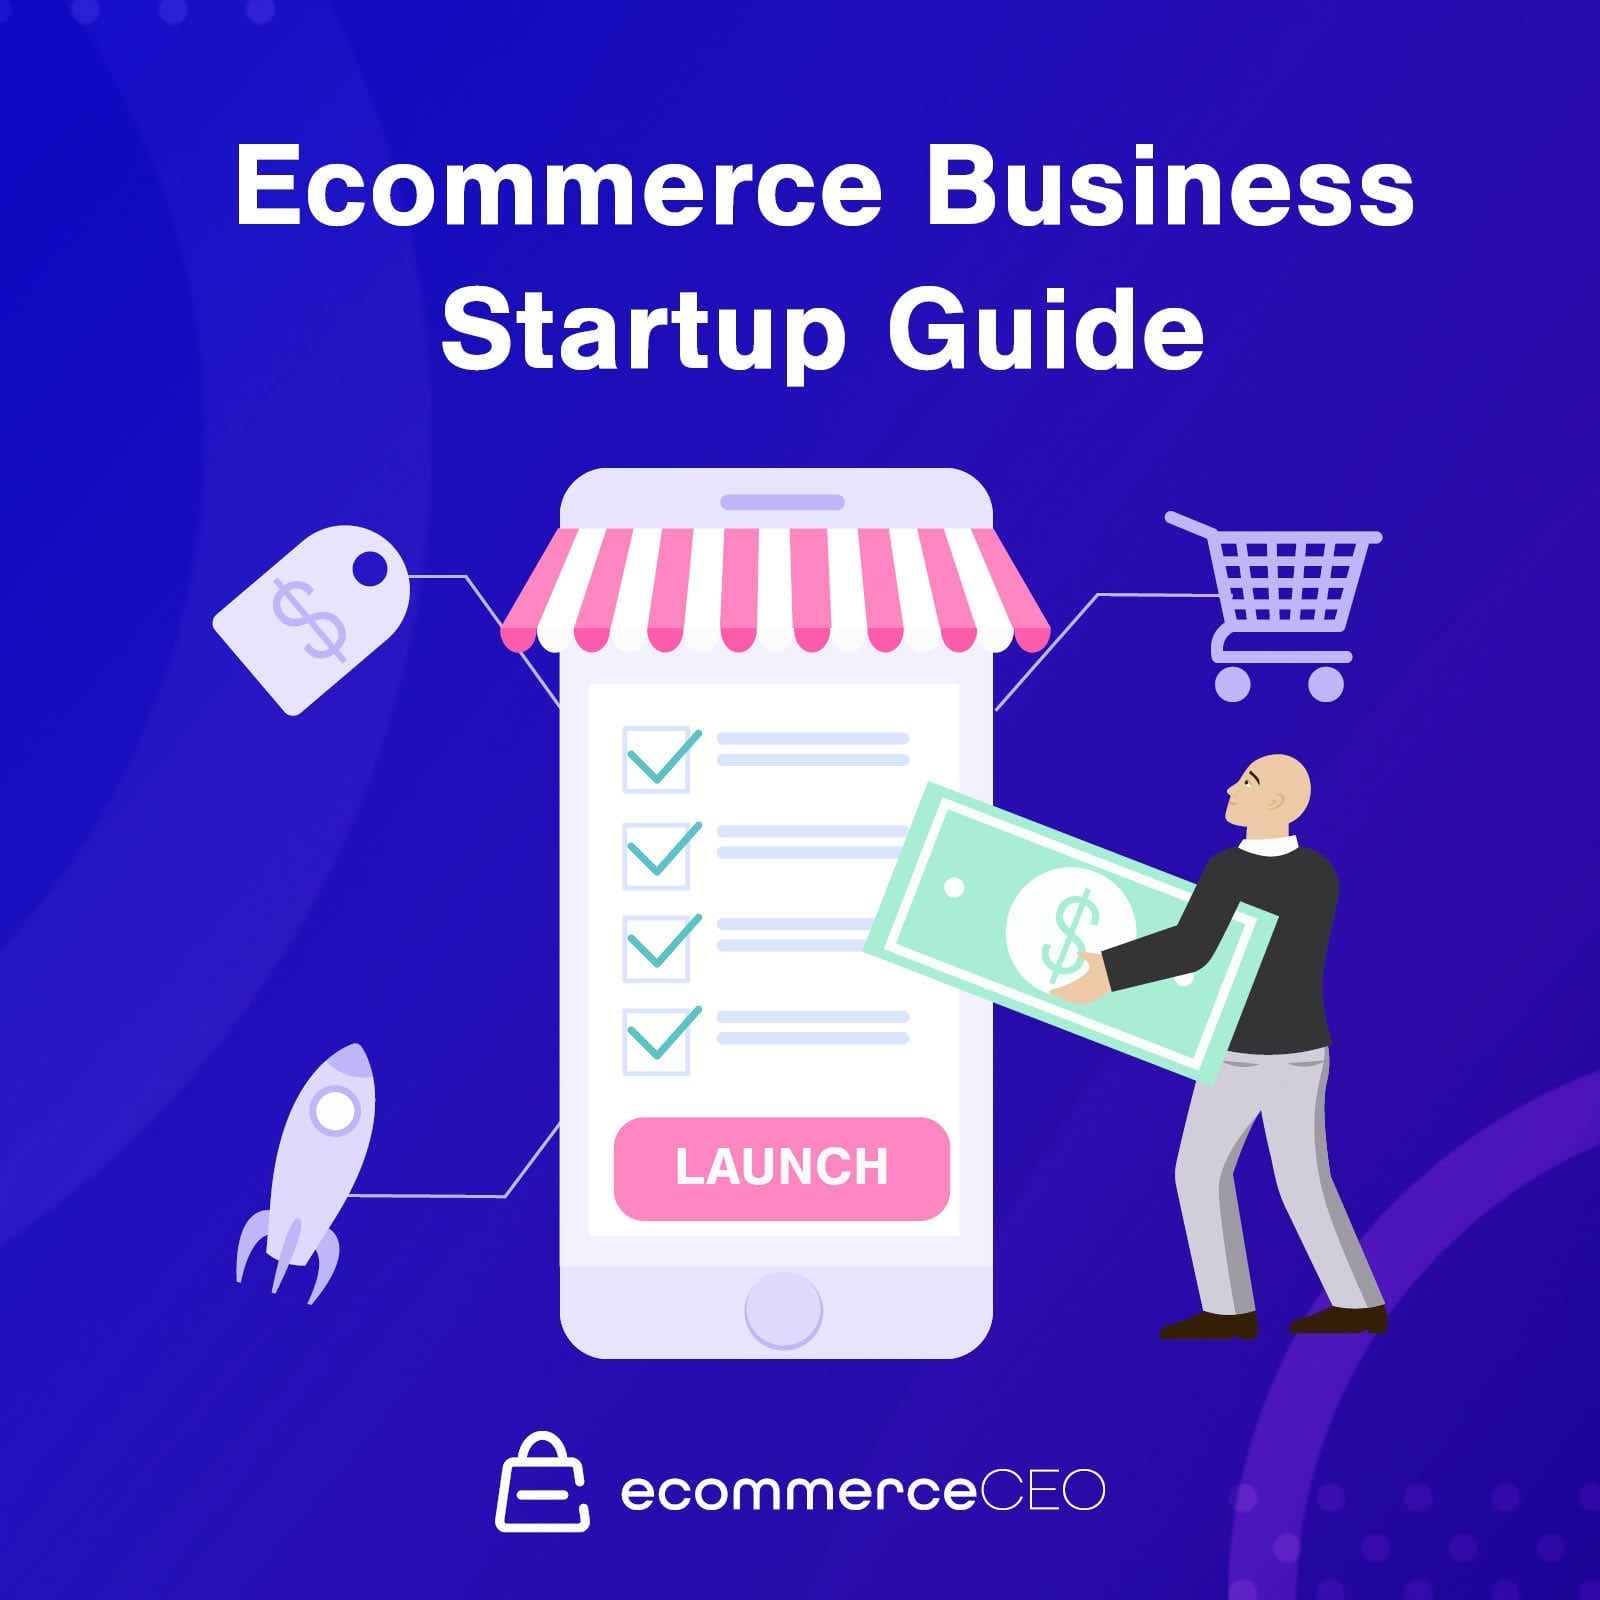 How To Start an Ecommerce Business From Scratch - 2021 [Free Guide]